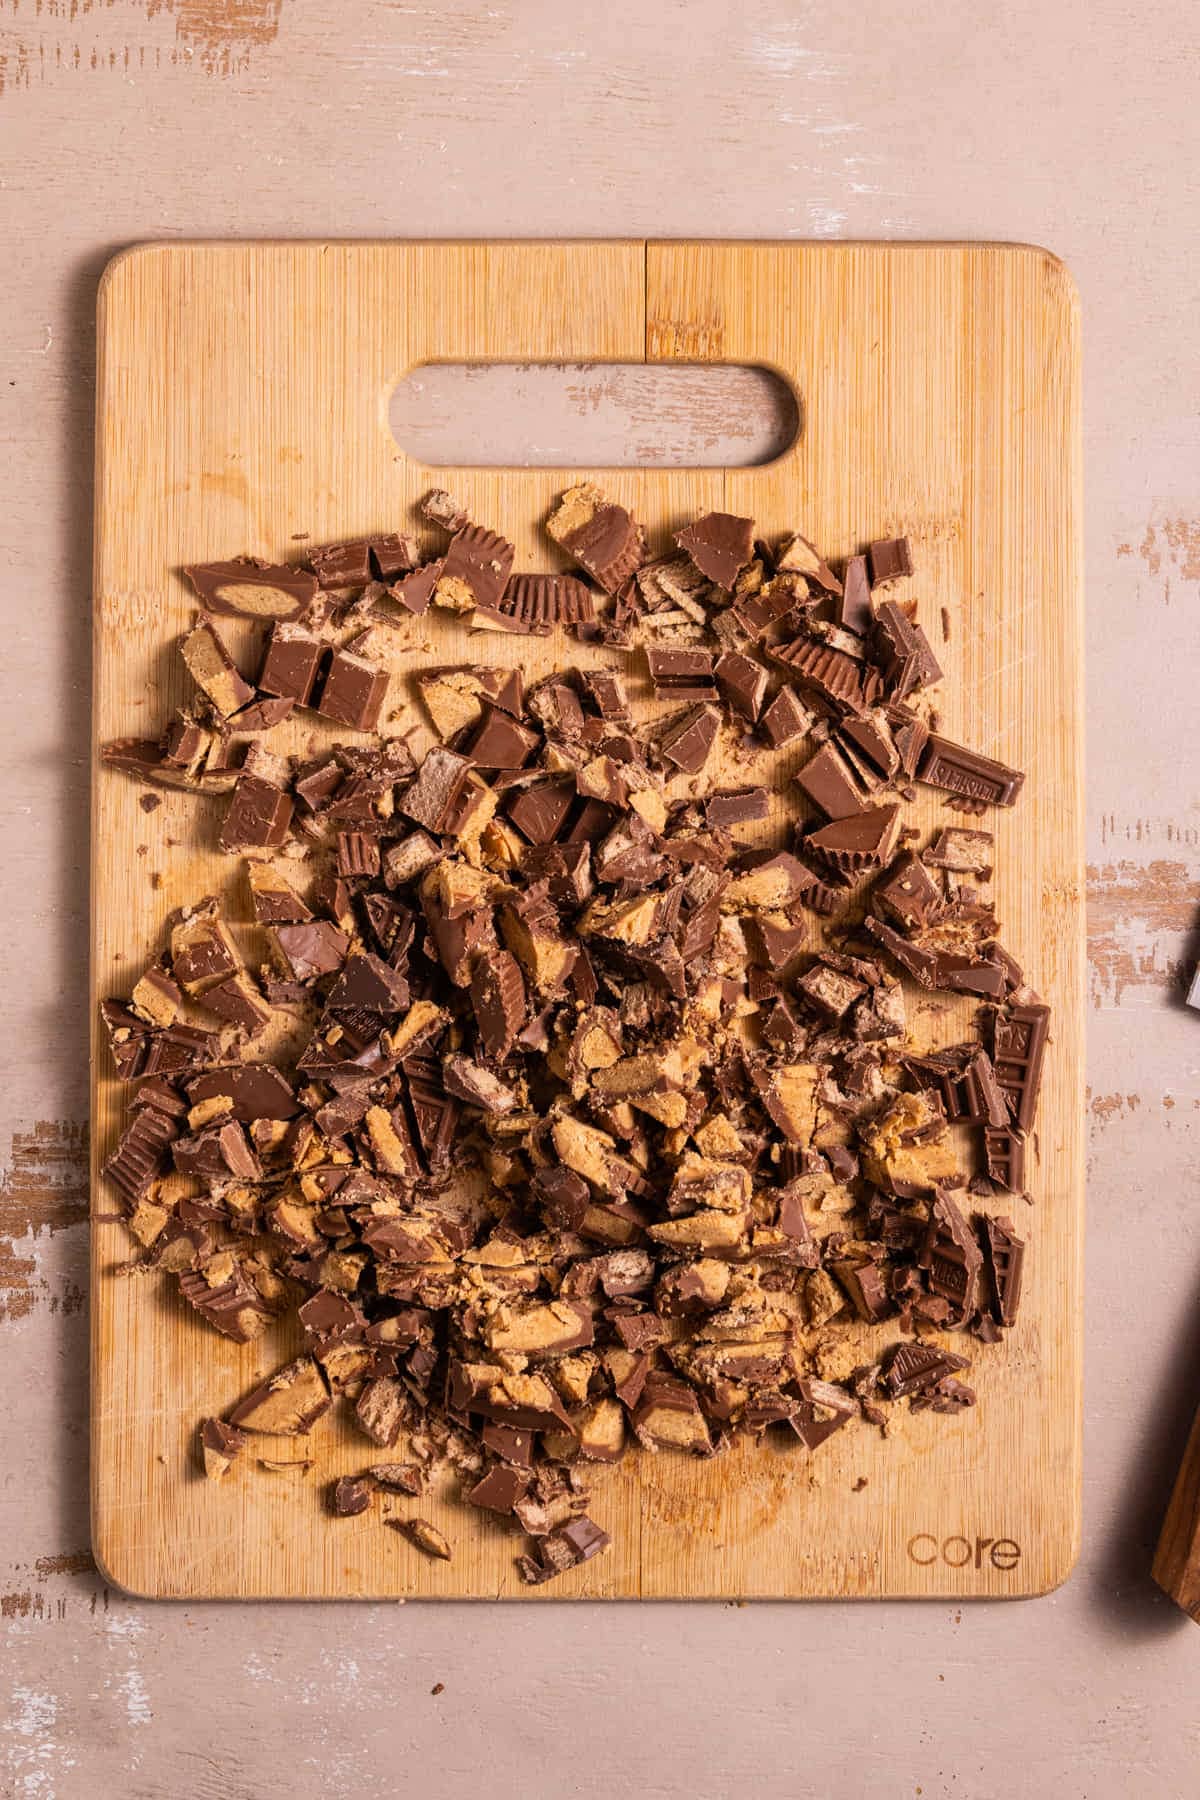 Kit Kats, Reese's cups, and Hersheys chocolate roughly chopped on a cutting board.